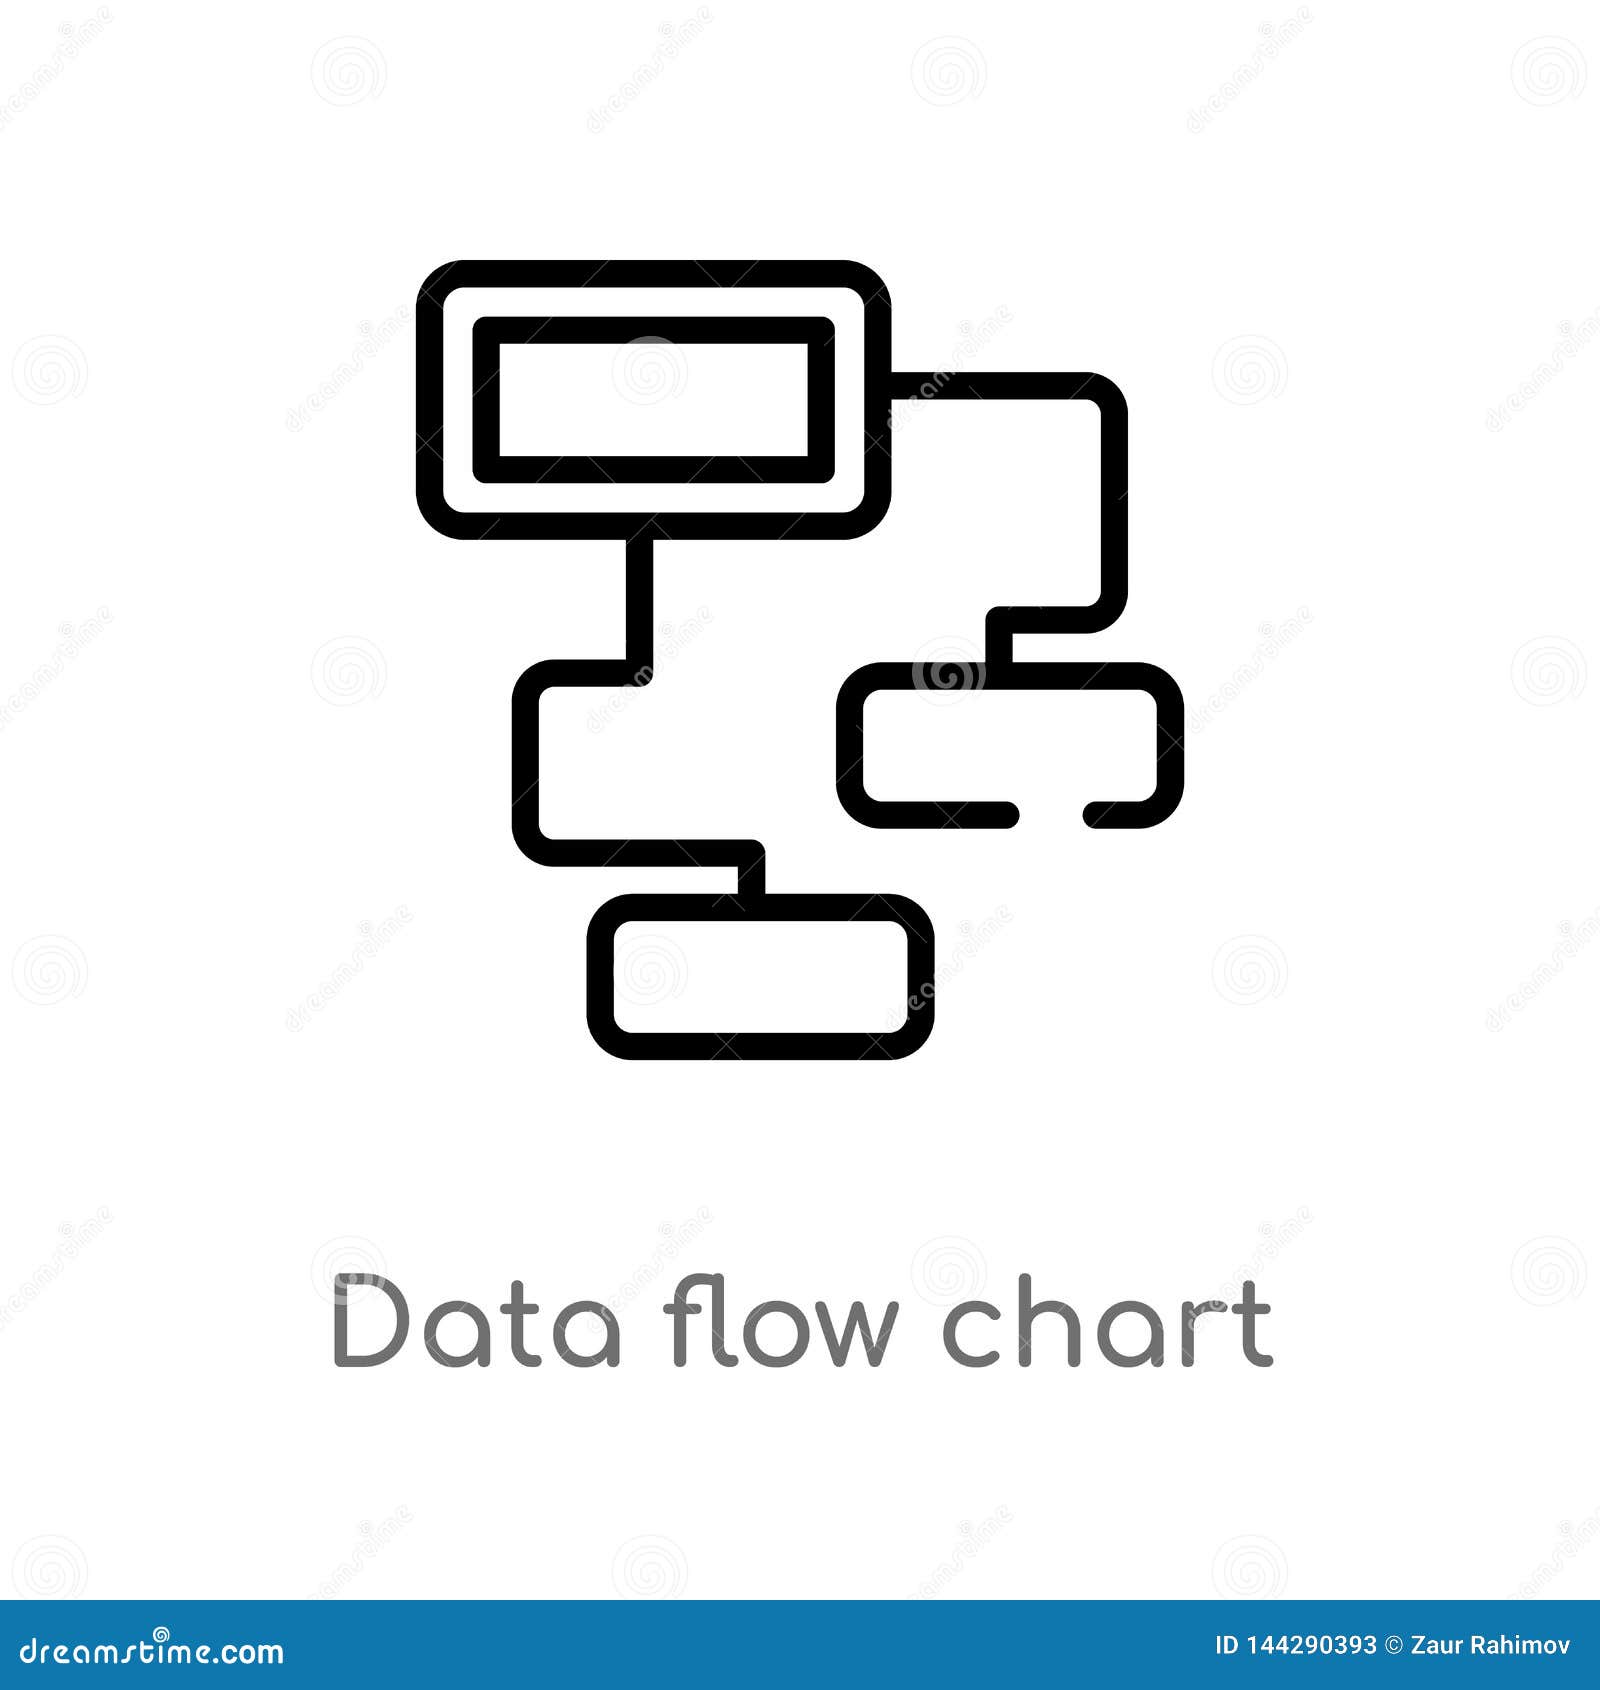 Flow Chart Outline